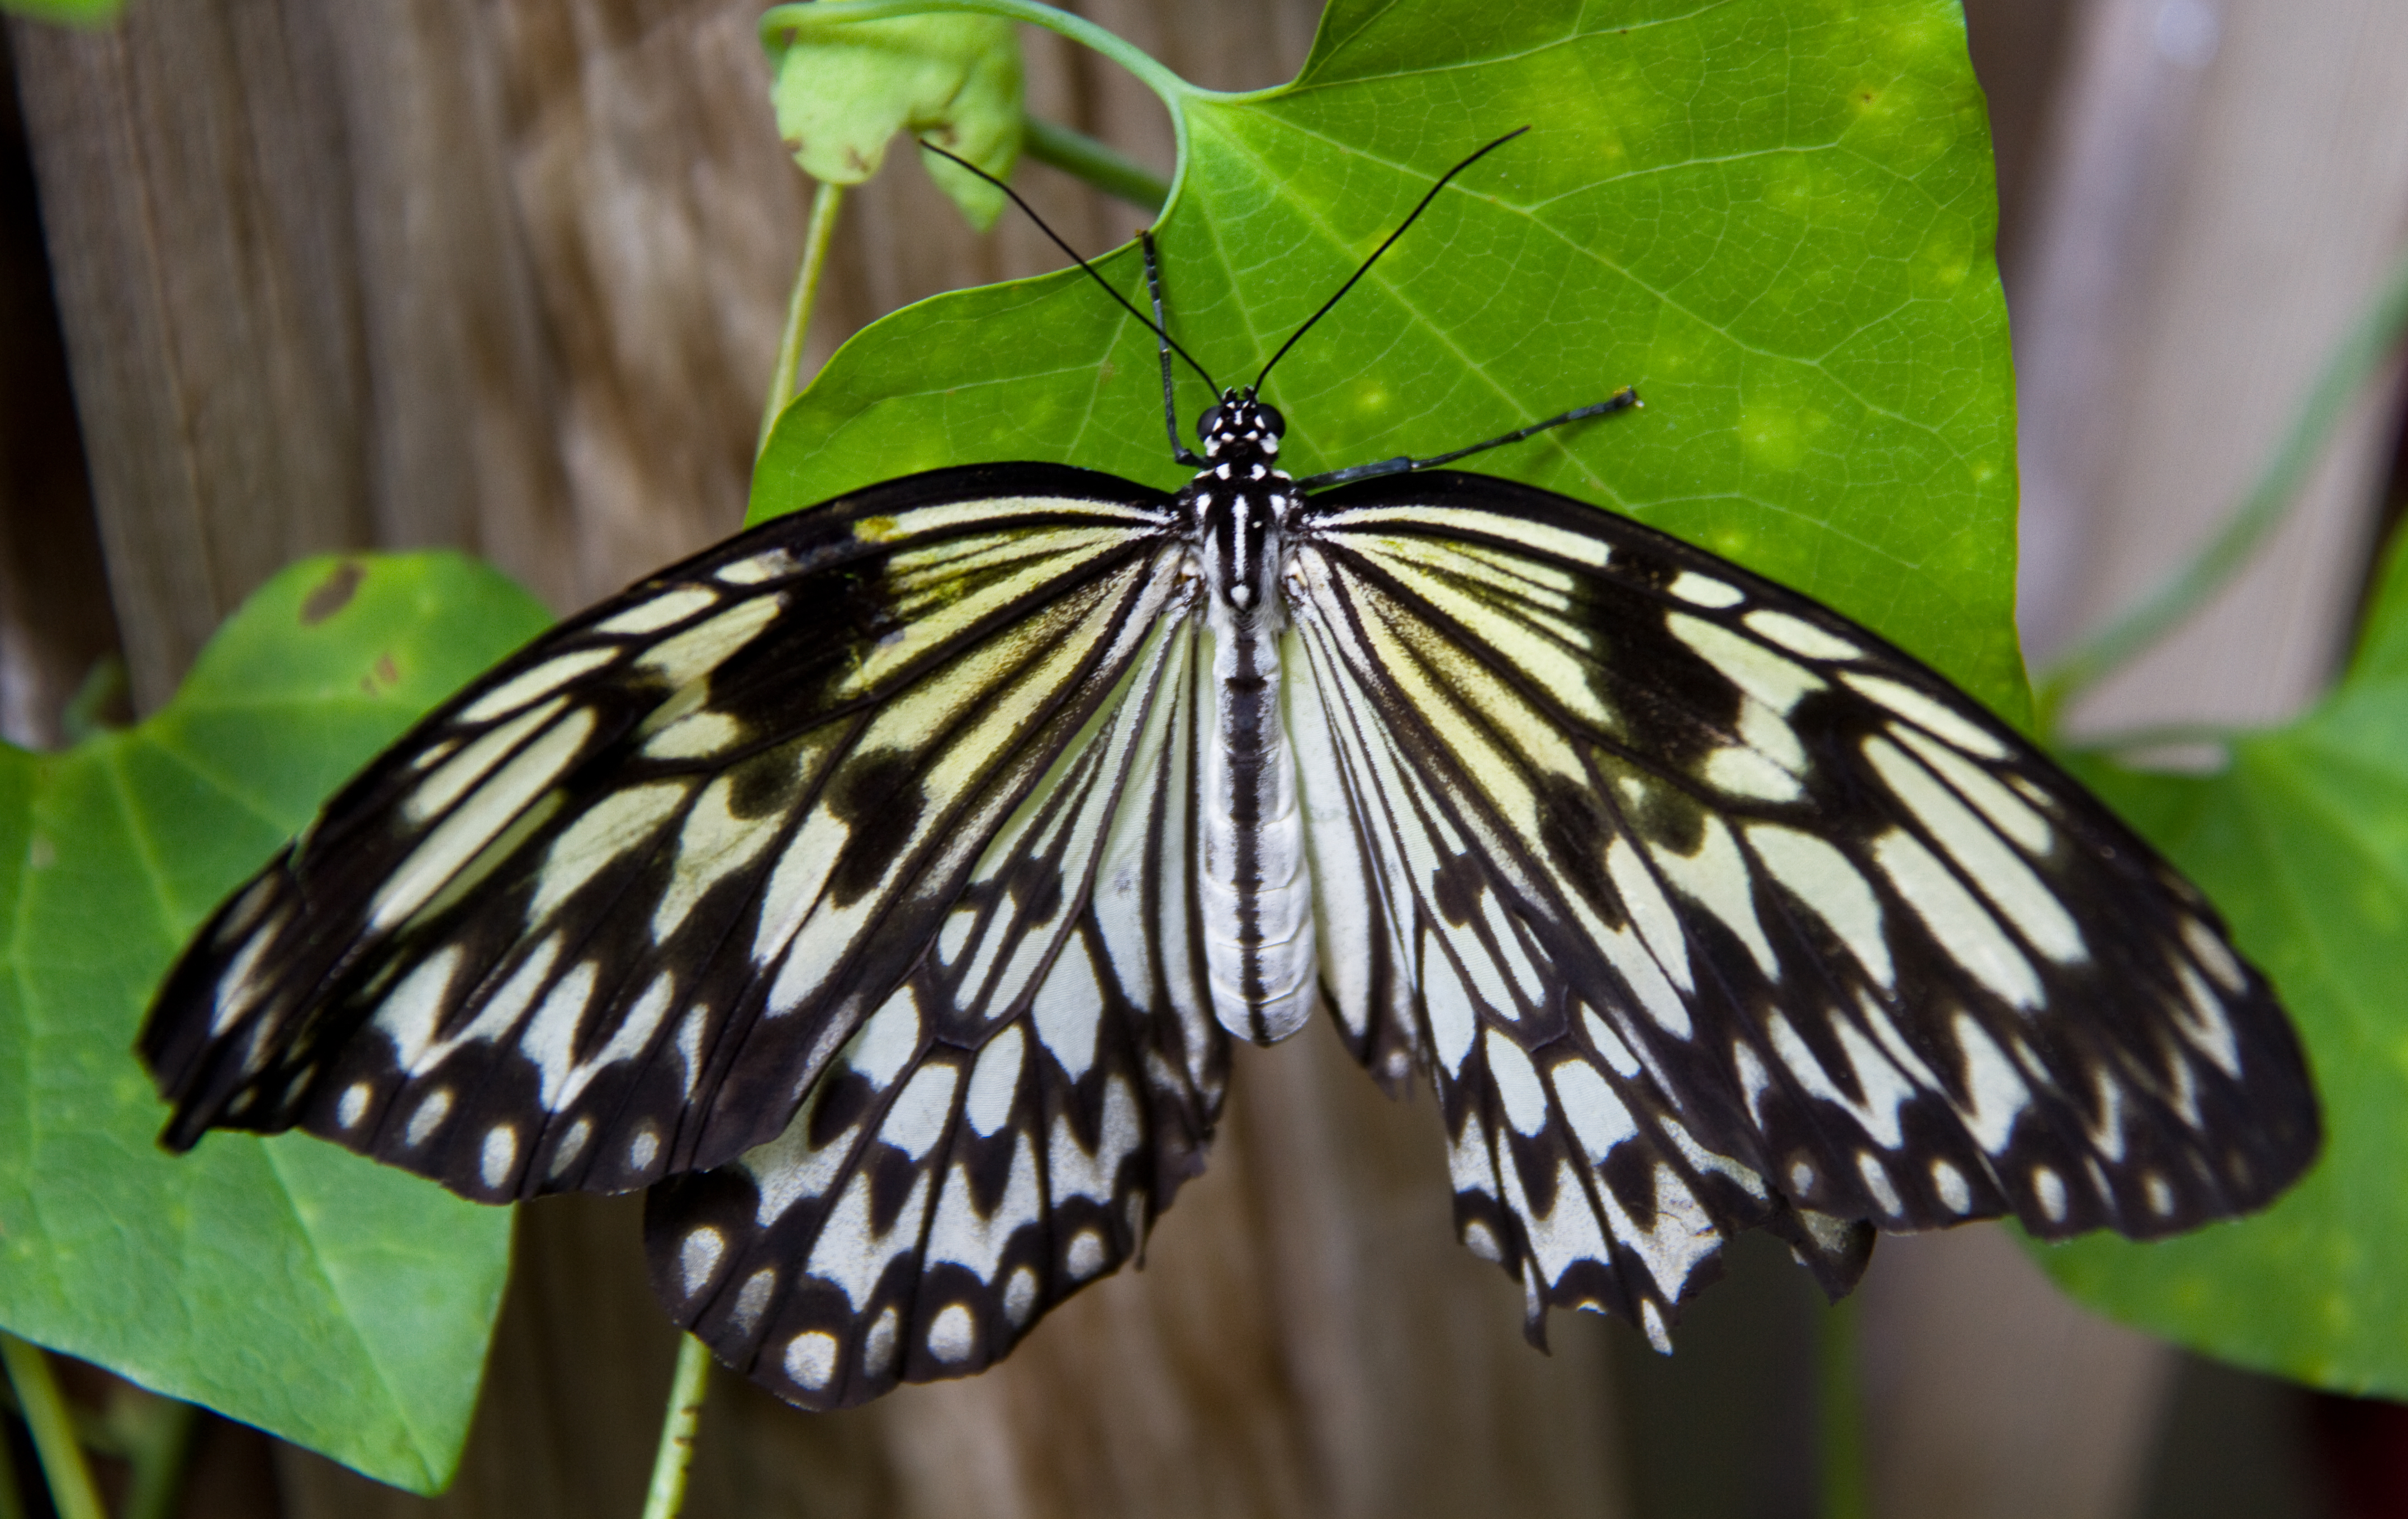 File:Black and White Butterfly 3 (7974366219) - Wikimedia Commons